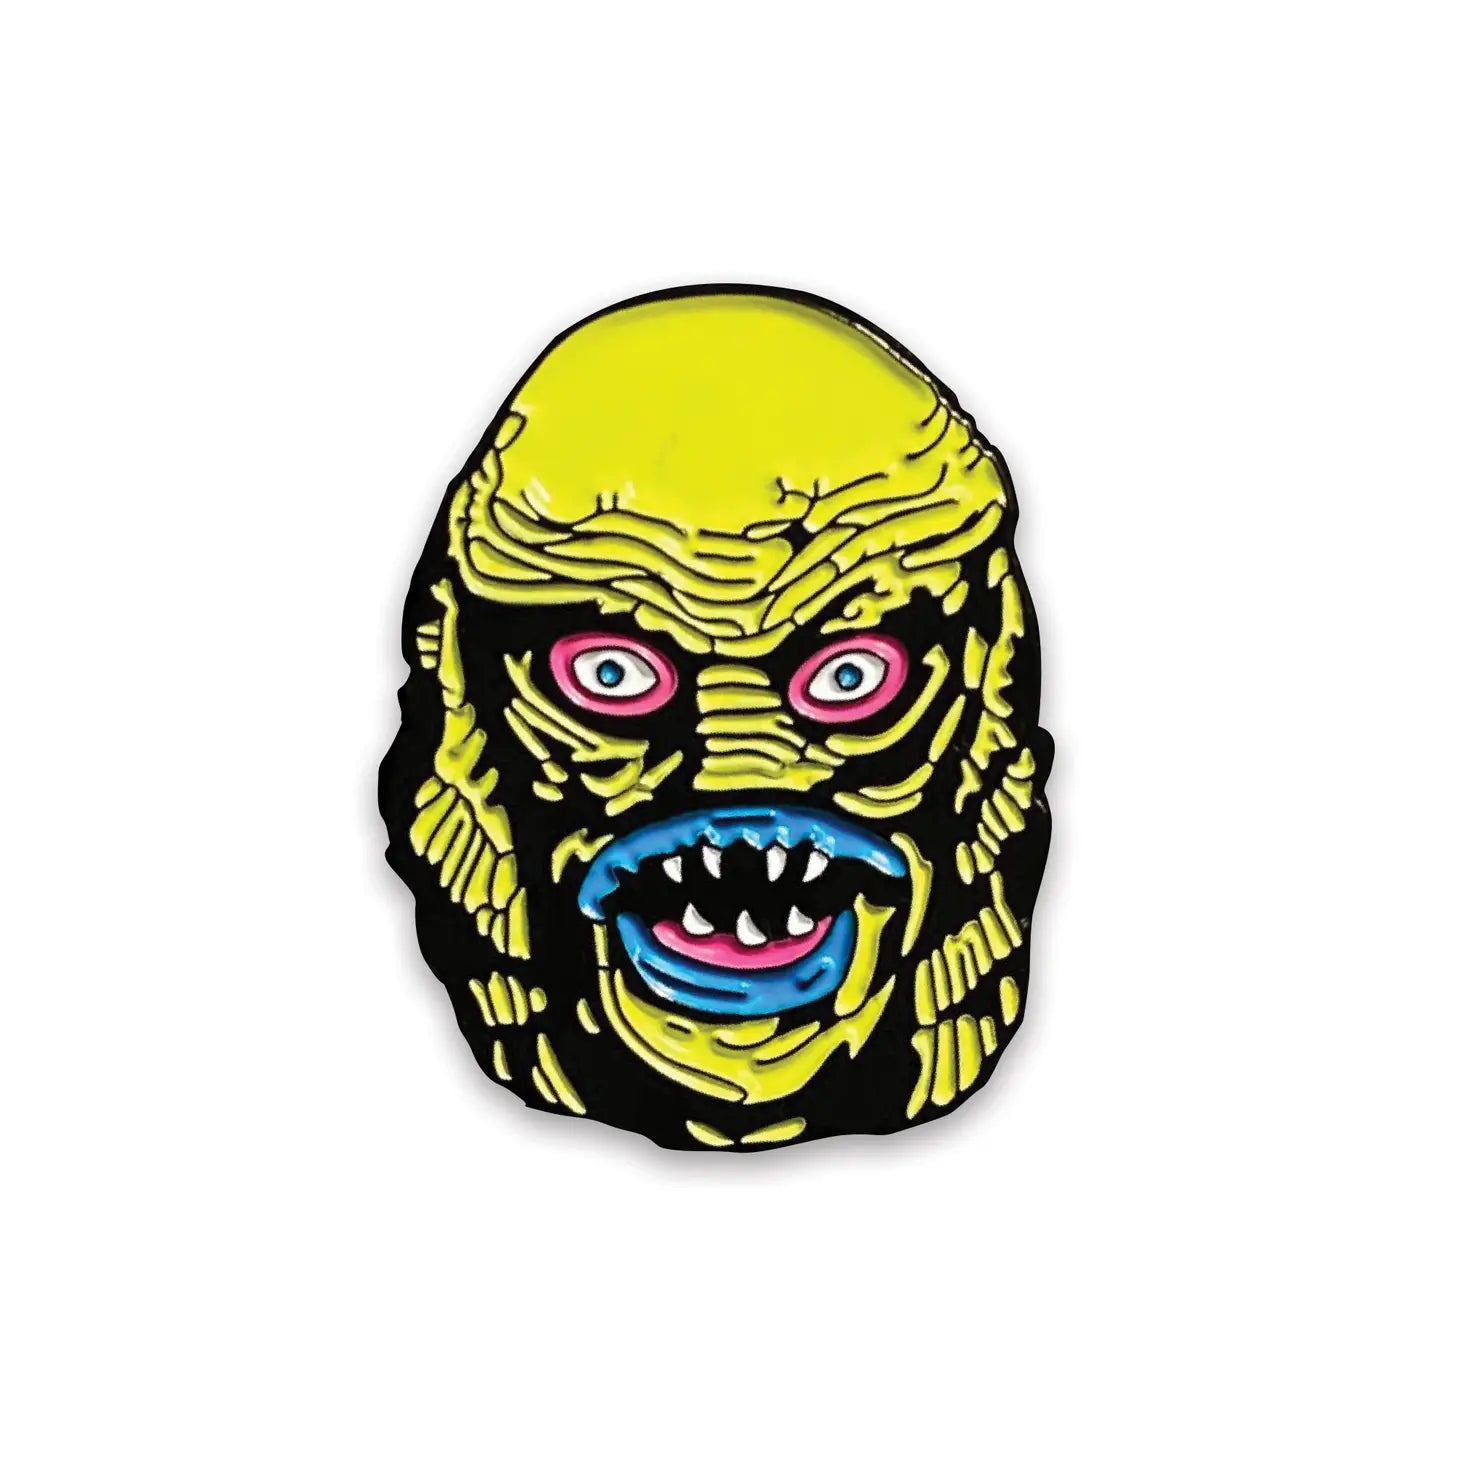 A black and neon green, pink, and blue enamel pin of the Creature from the Black Lagoon